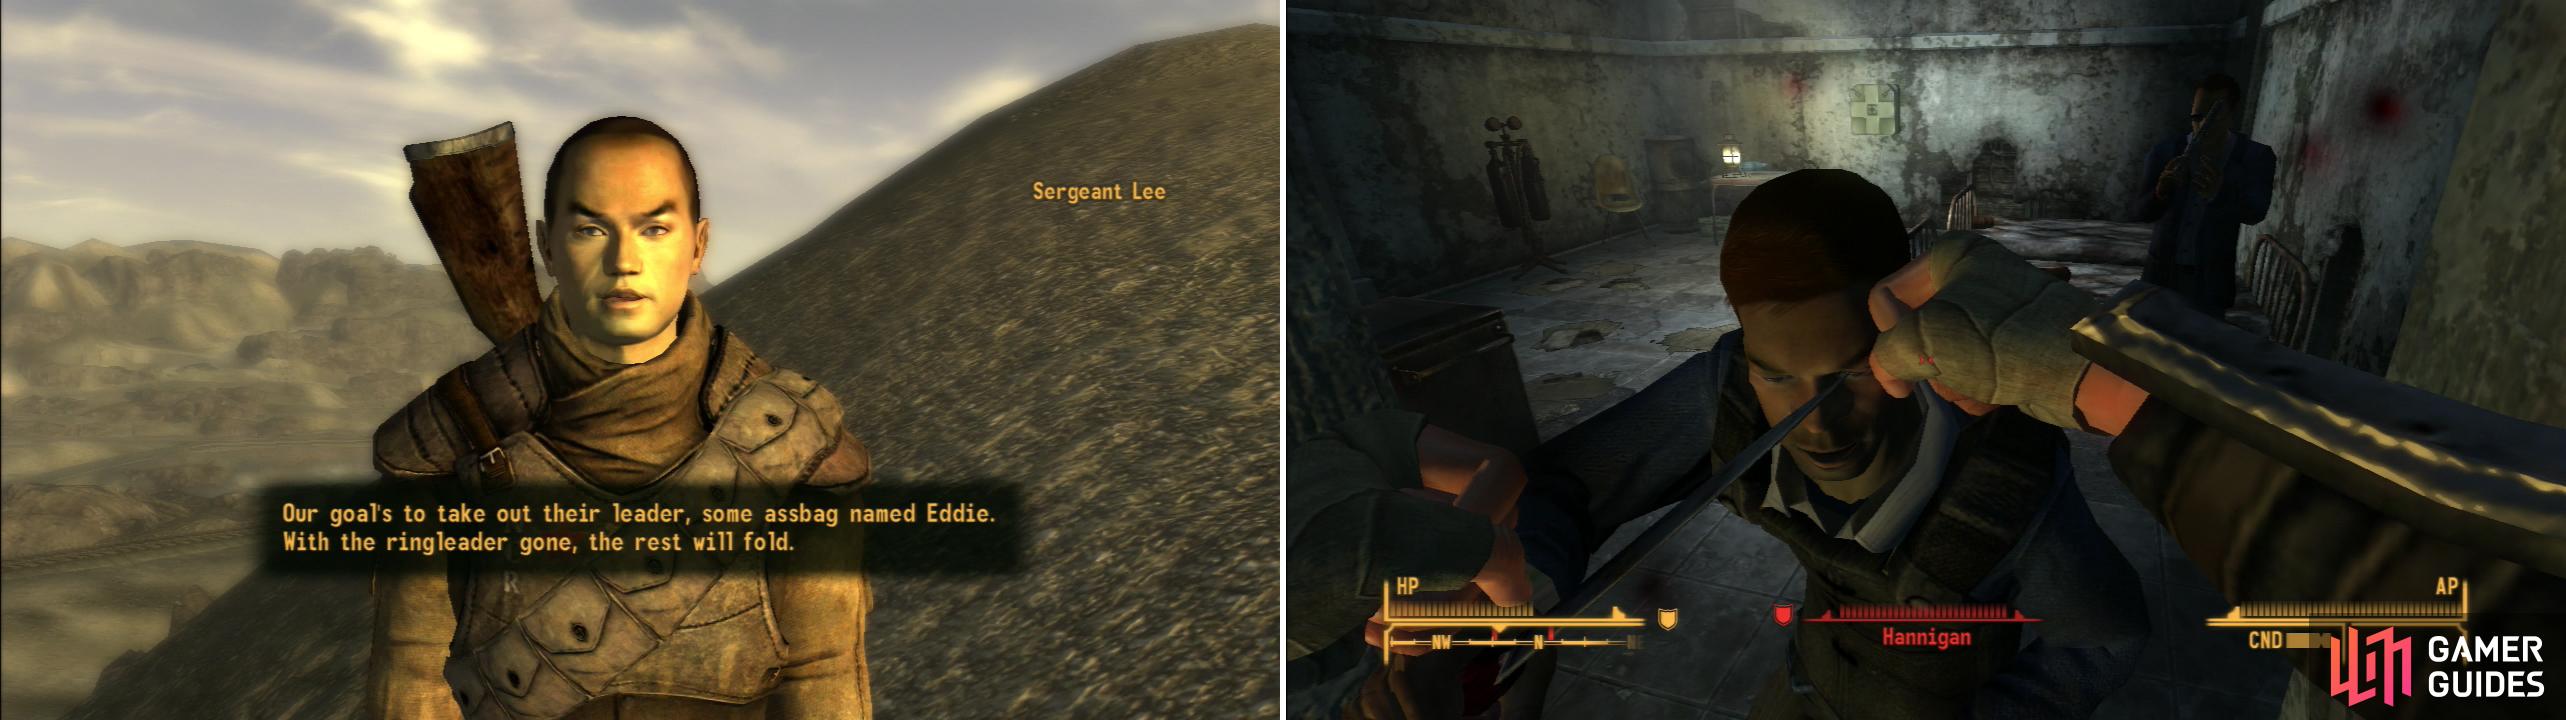 If you want to help clear the Powder Gangers out of the NCRCF, find Sergeant Lee in the hills near the prison (left). Help the NCR kill the Powder Gangers, using KO weapons to mitigate the Infamy you’ll gain (right).